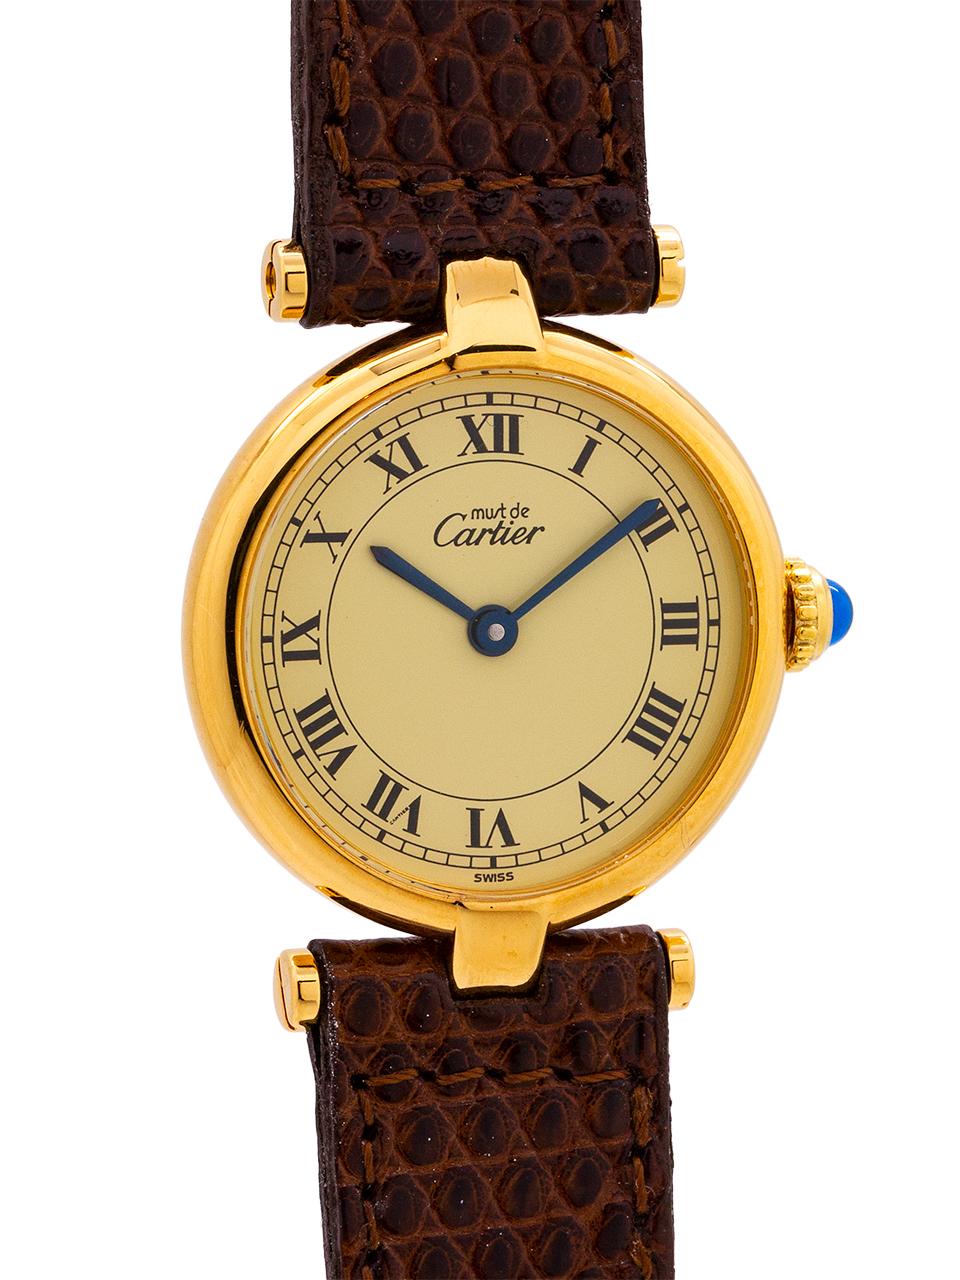 
Cartier women’s vermeil Vendome Tank wristwatch circa 1990s. Case mesuring 24 x 31mm with T-bar lugs. Featuring an original cream dial with classic printed Cartier Roman numbers, signed must de Cartier, with blued steel hands and blue sapphire